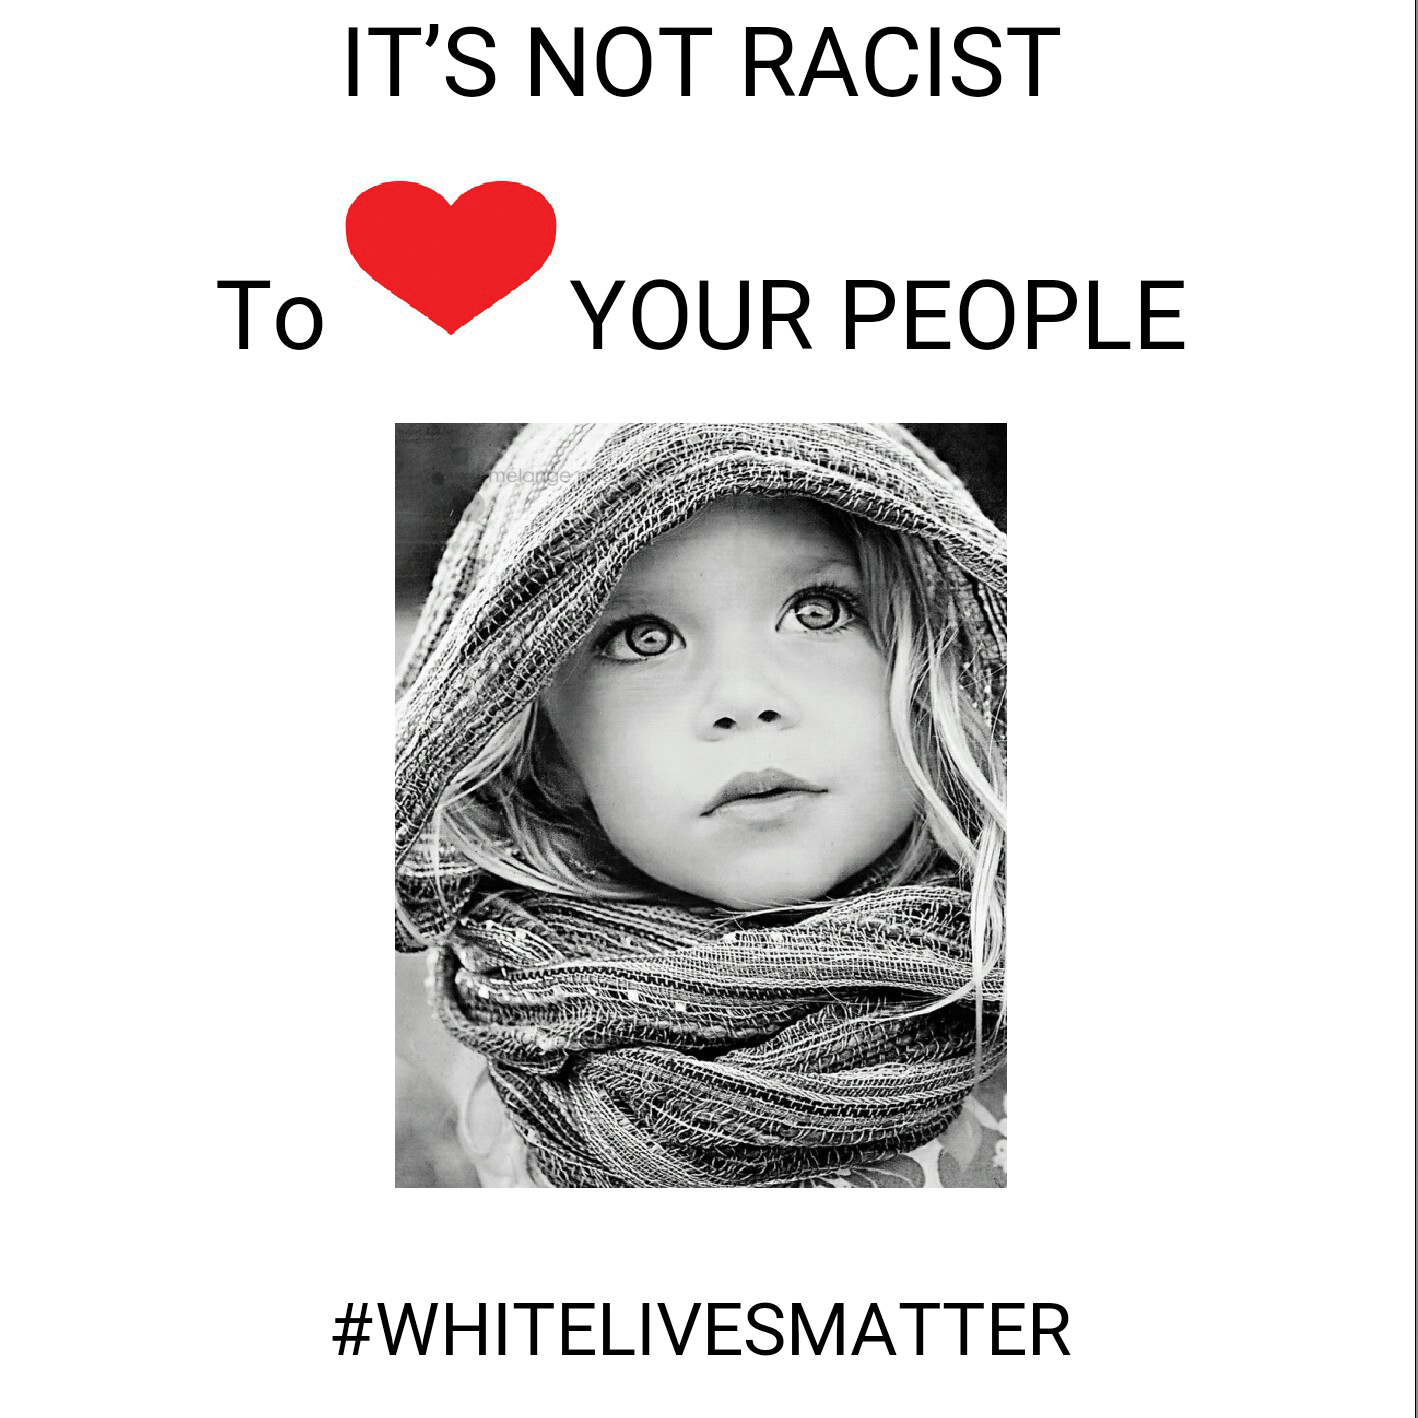 Sign reading "It's not racist to <3 your people. #WhiteLivesMatter"